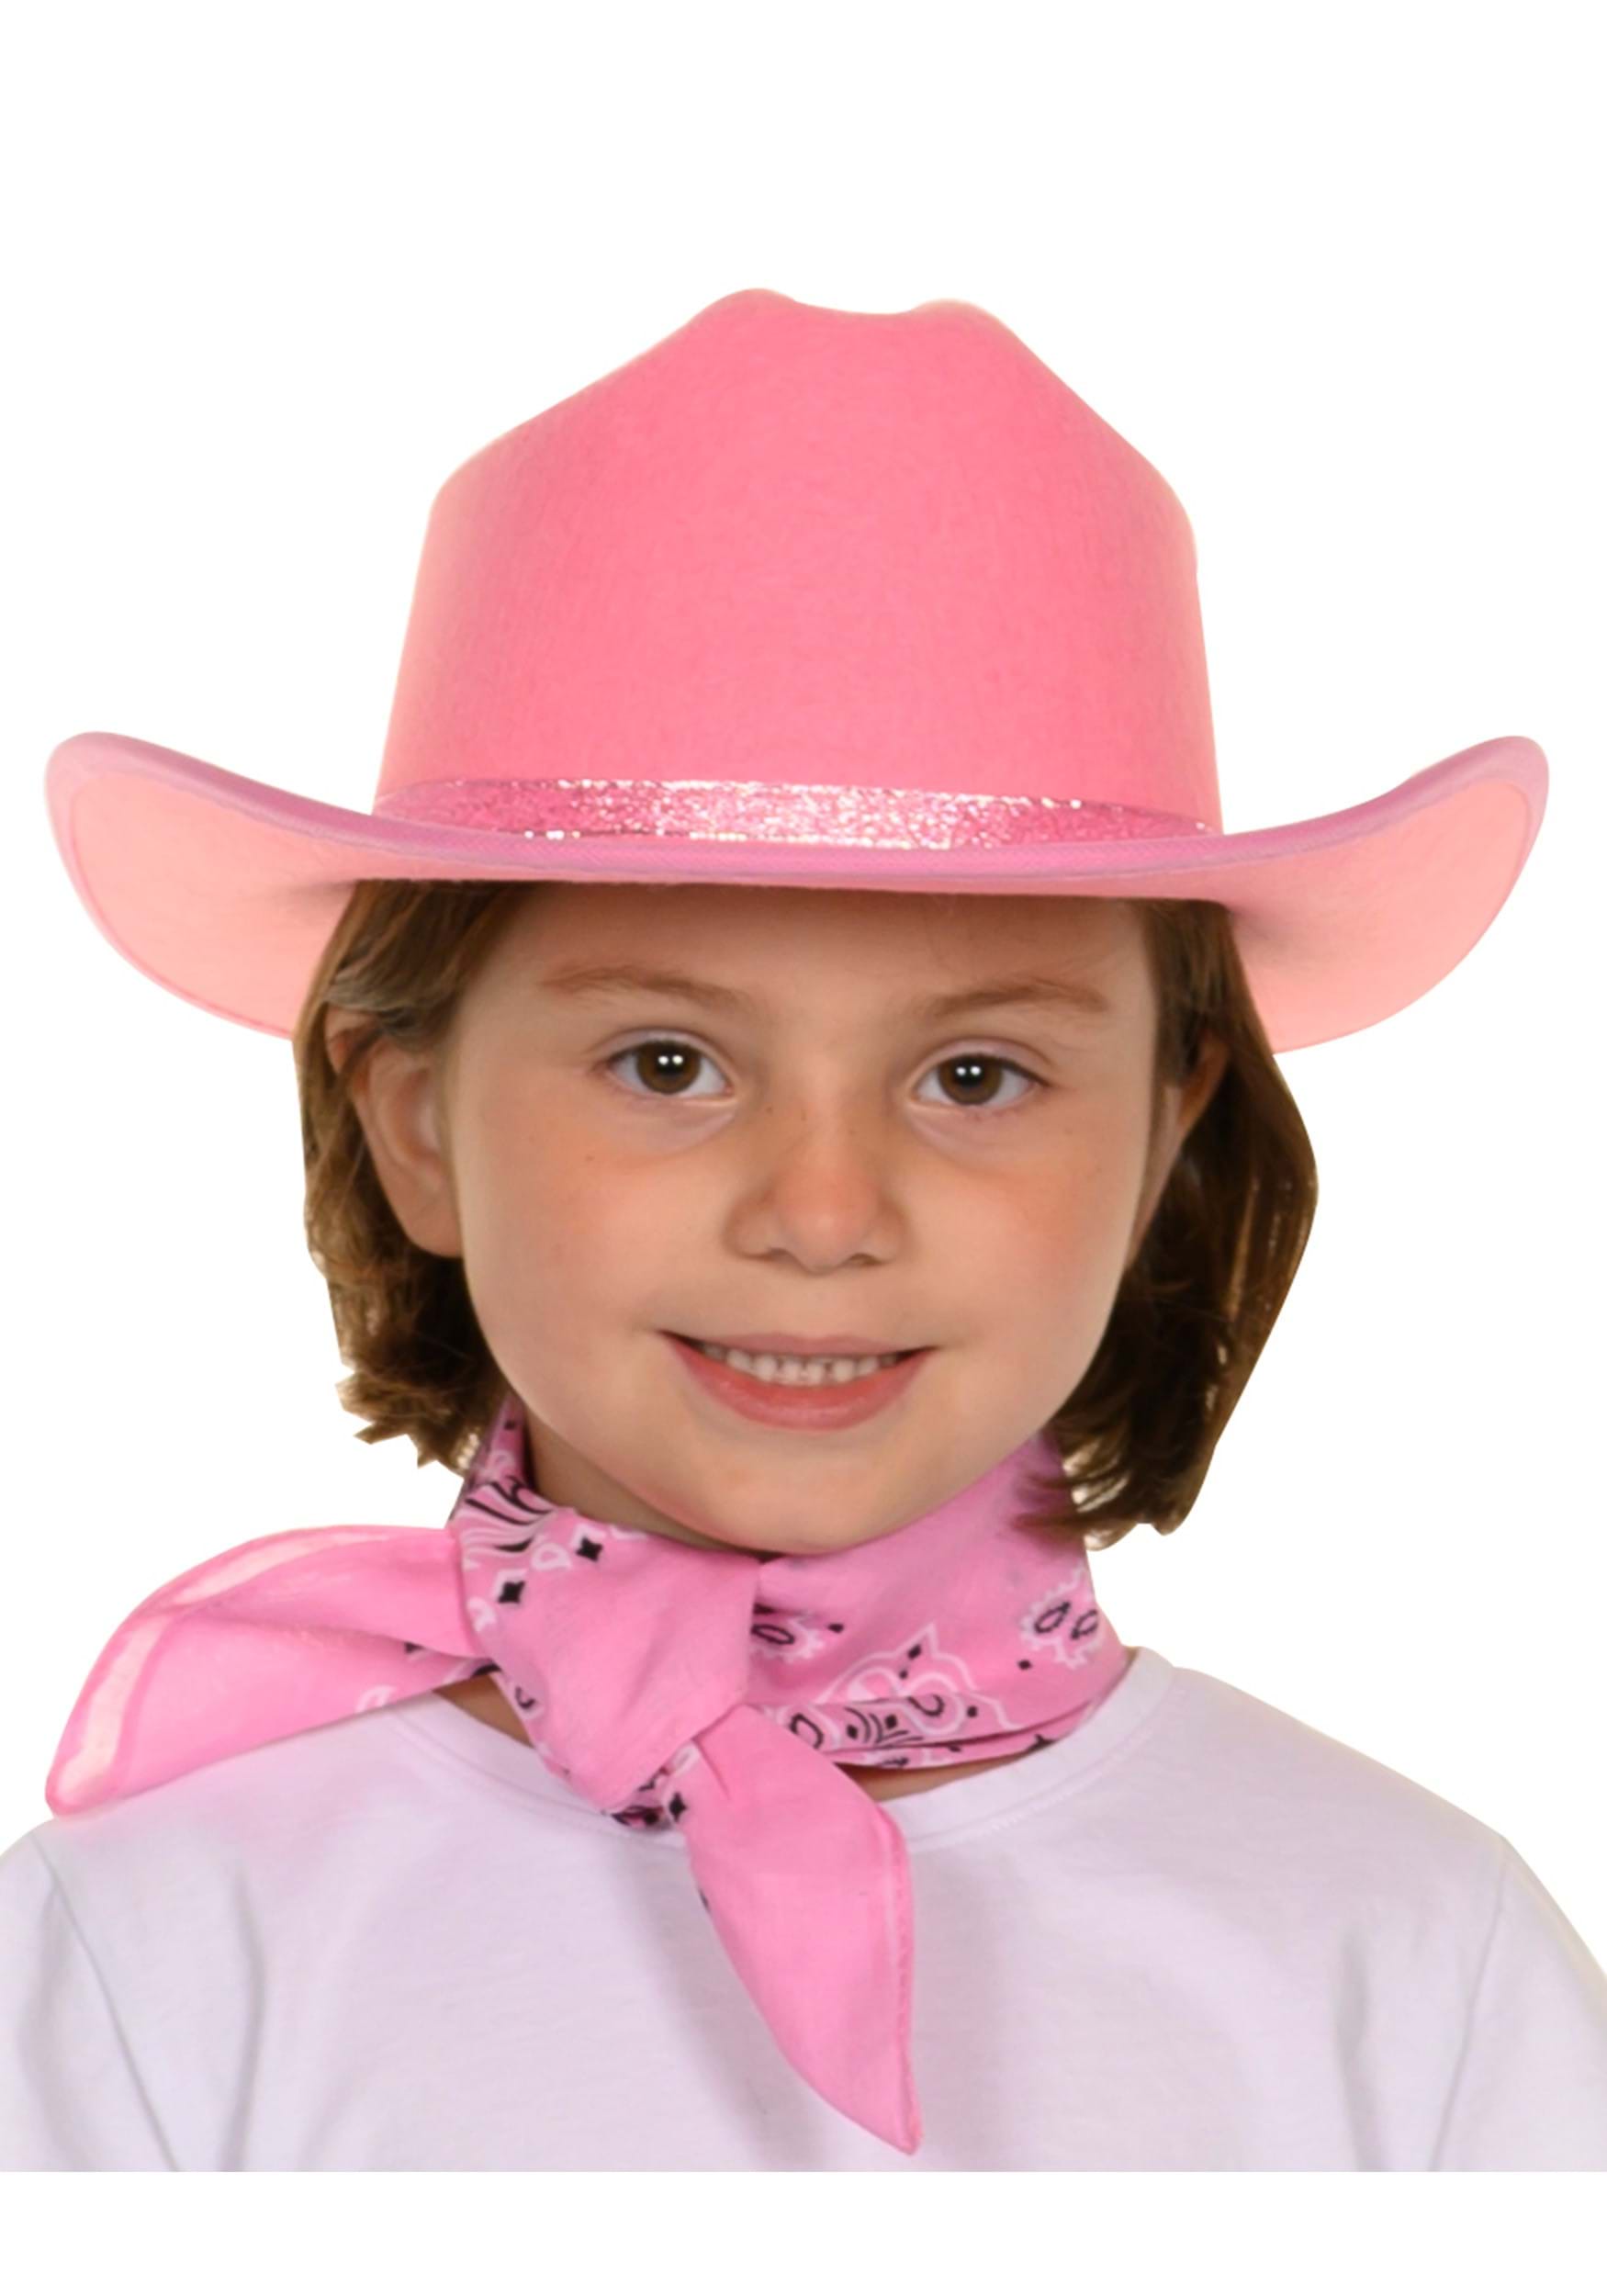 N/ C Pink Cowgirl Hats Cowboy Hats Hats with Heart Shaped Sunglasses Bandanas for Halloween Christmas Party Costume 